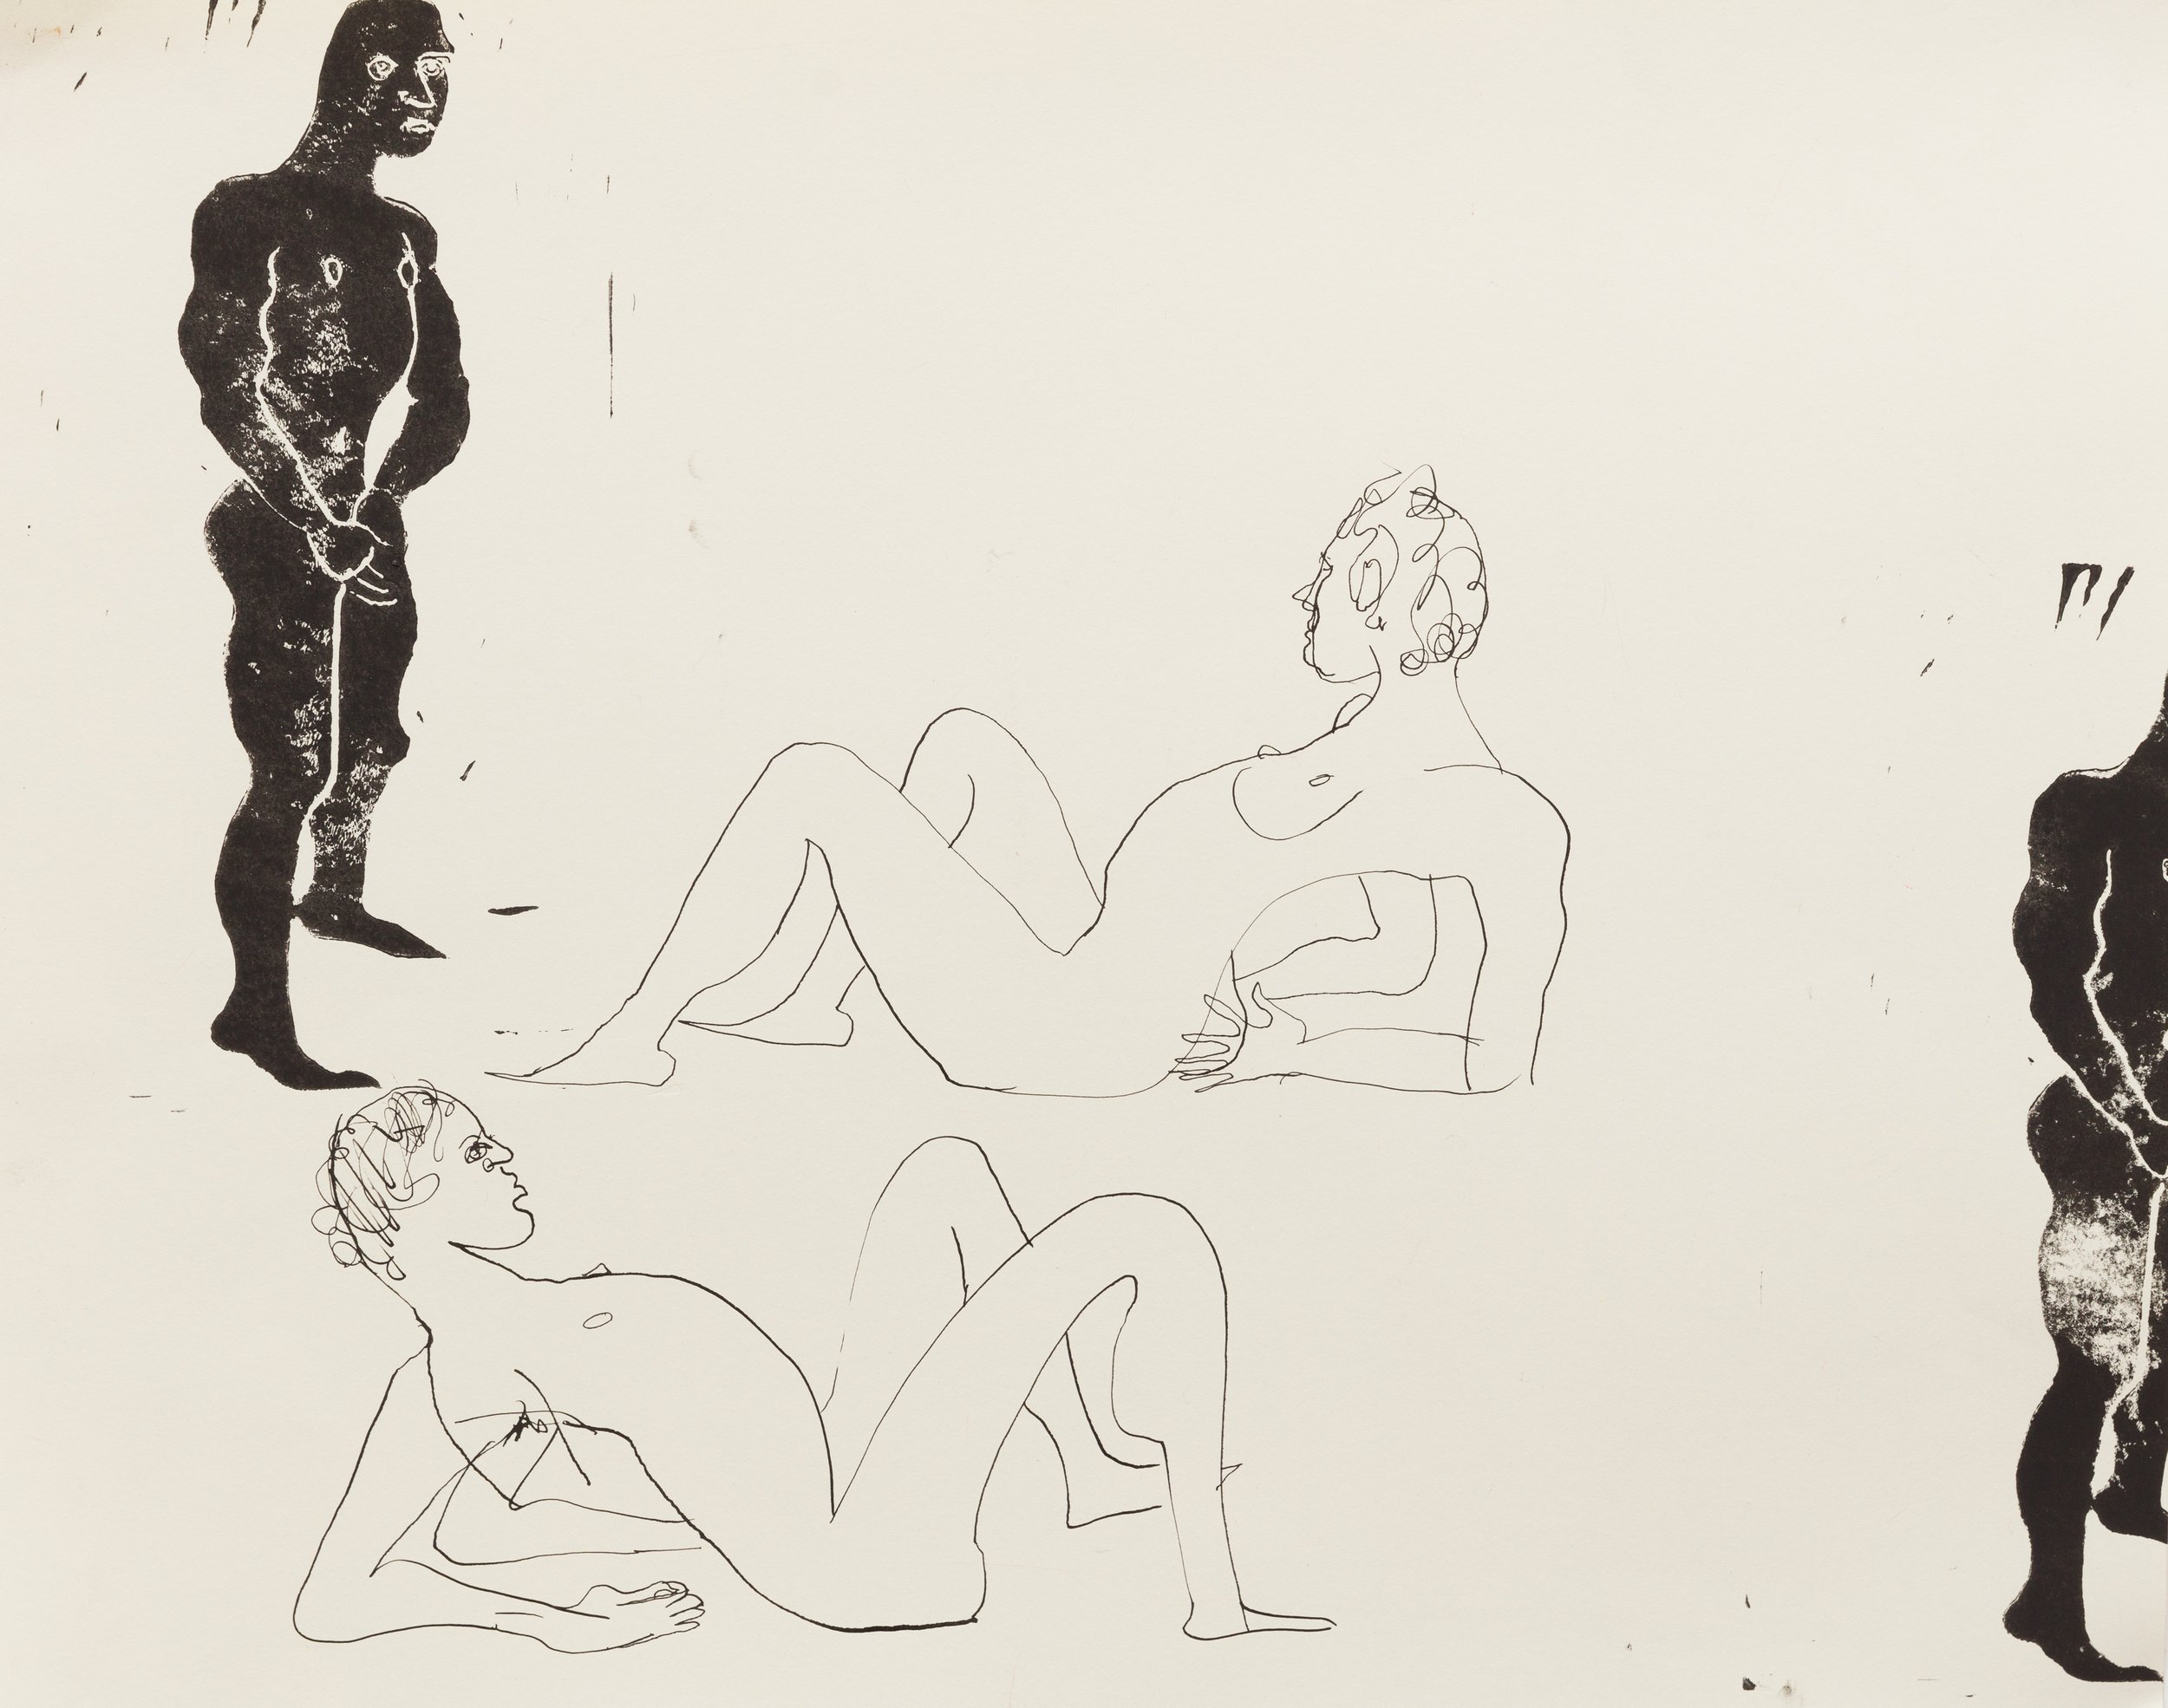 Bathers, ink and lino print on paper, 2020